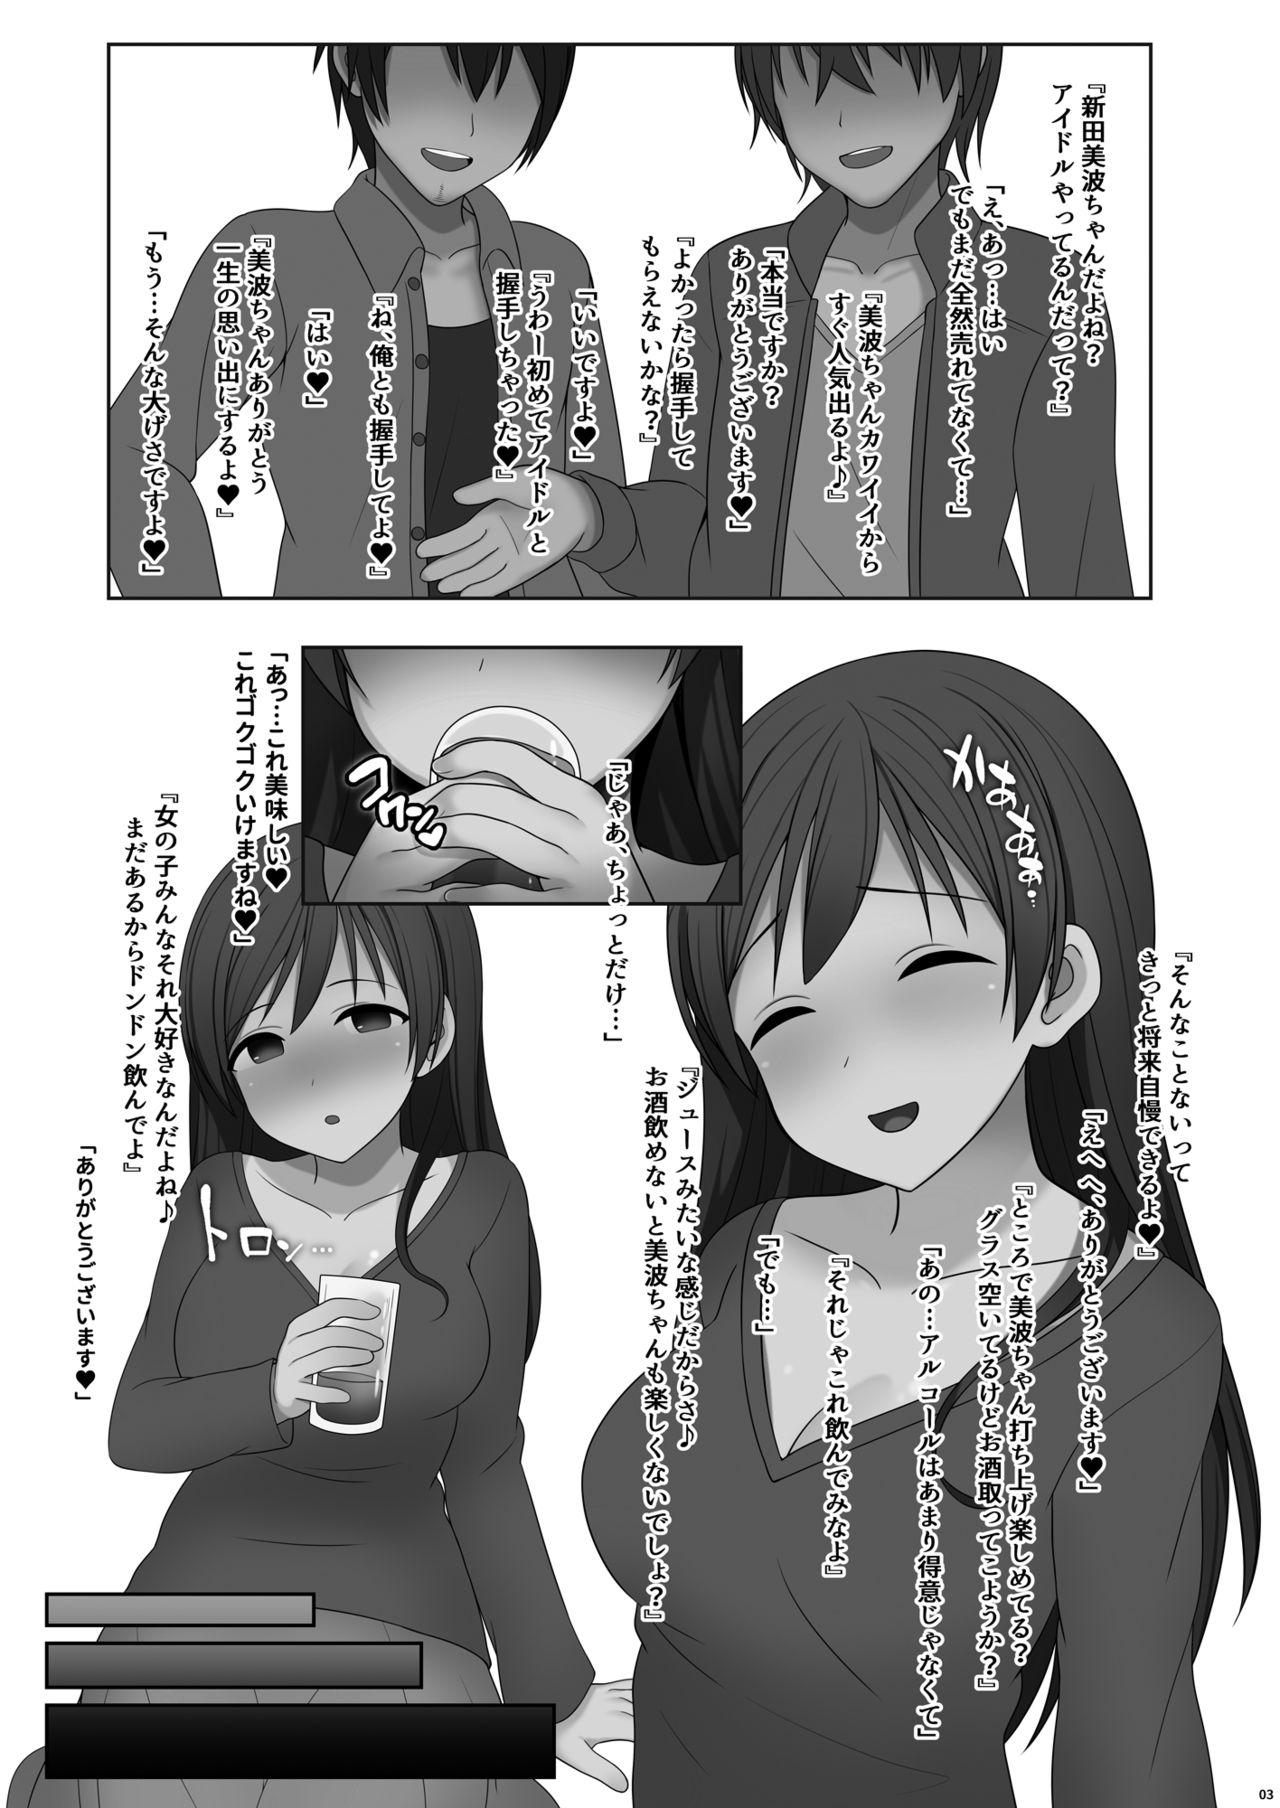 Deepthroat fall in ECSTASY - The idolmaster Short - Page 4